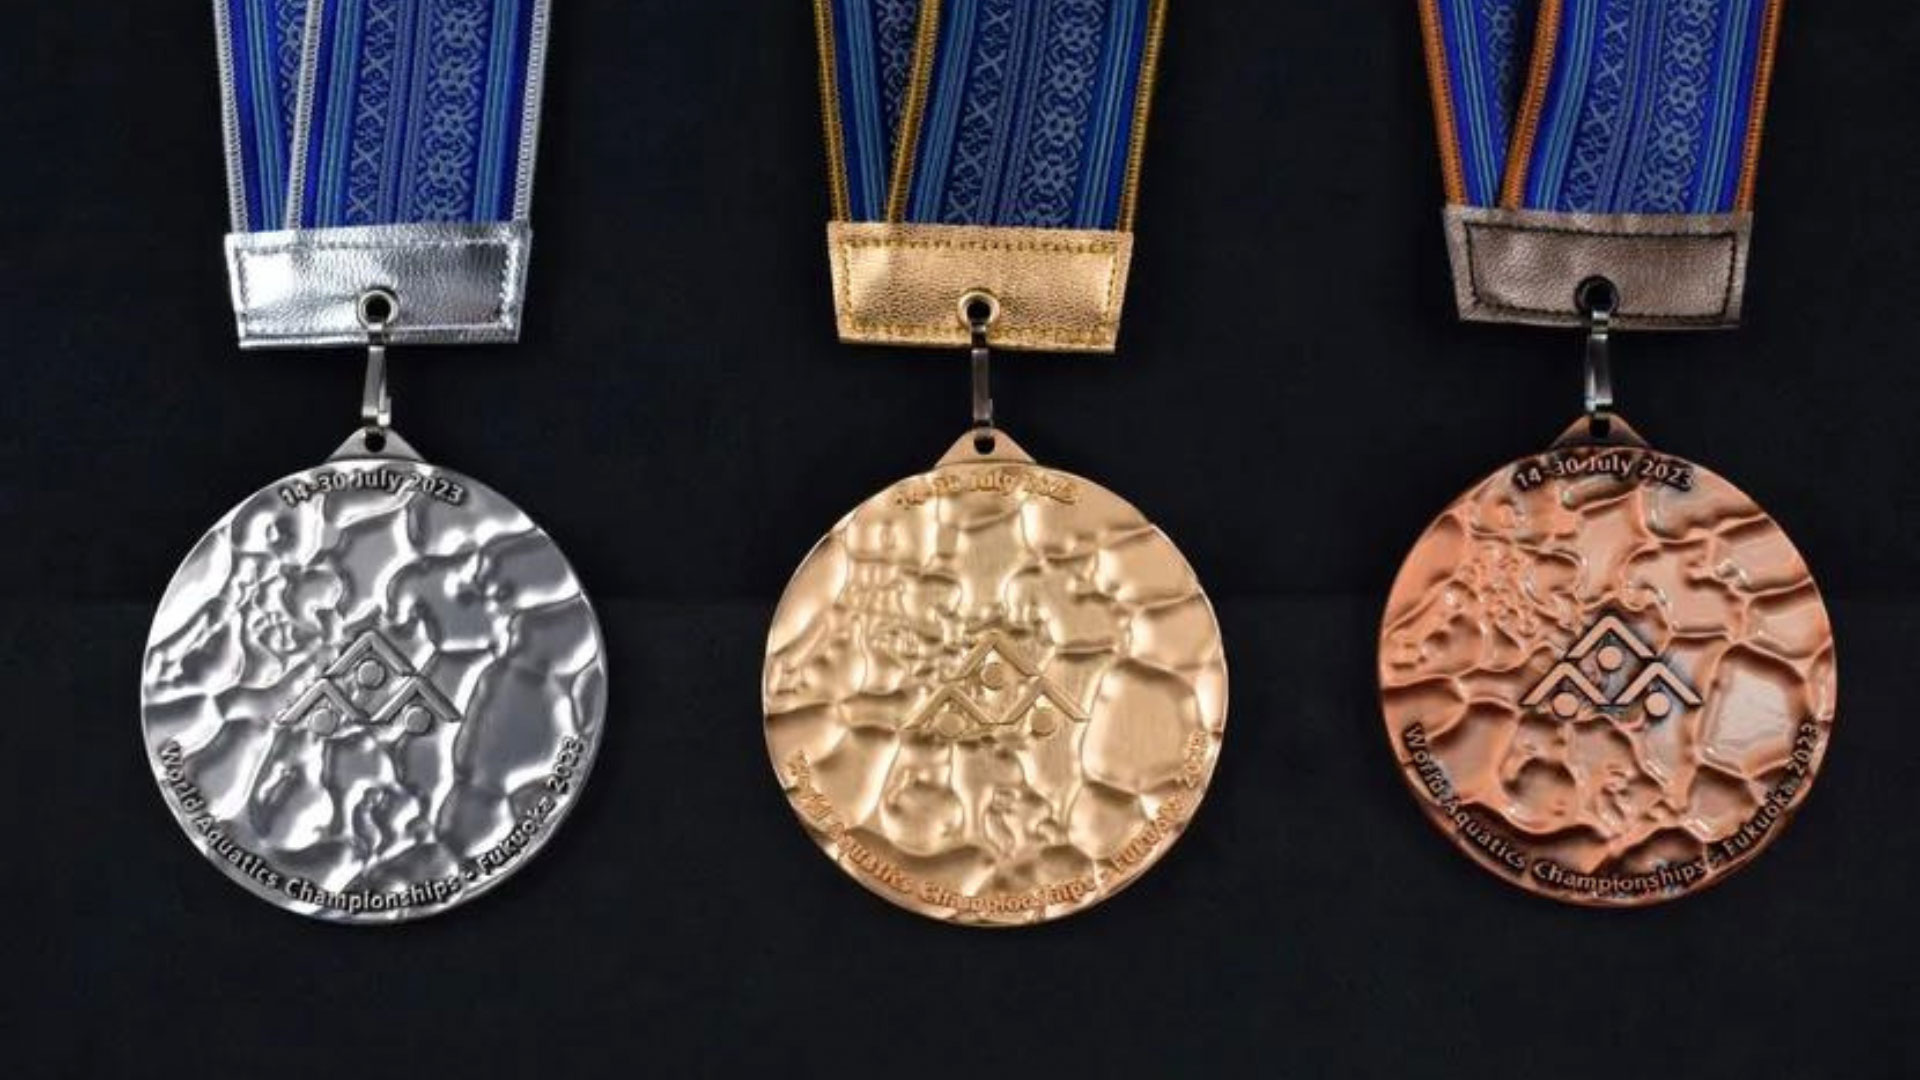 50 days before the World Cup, World Aquatics announced the medals that will be awarded in Fukuoka